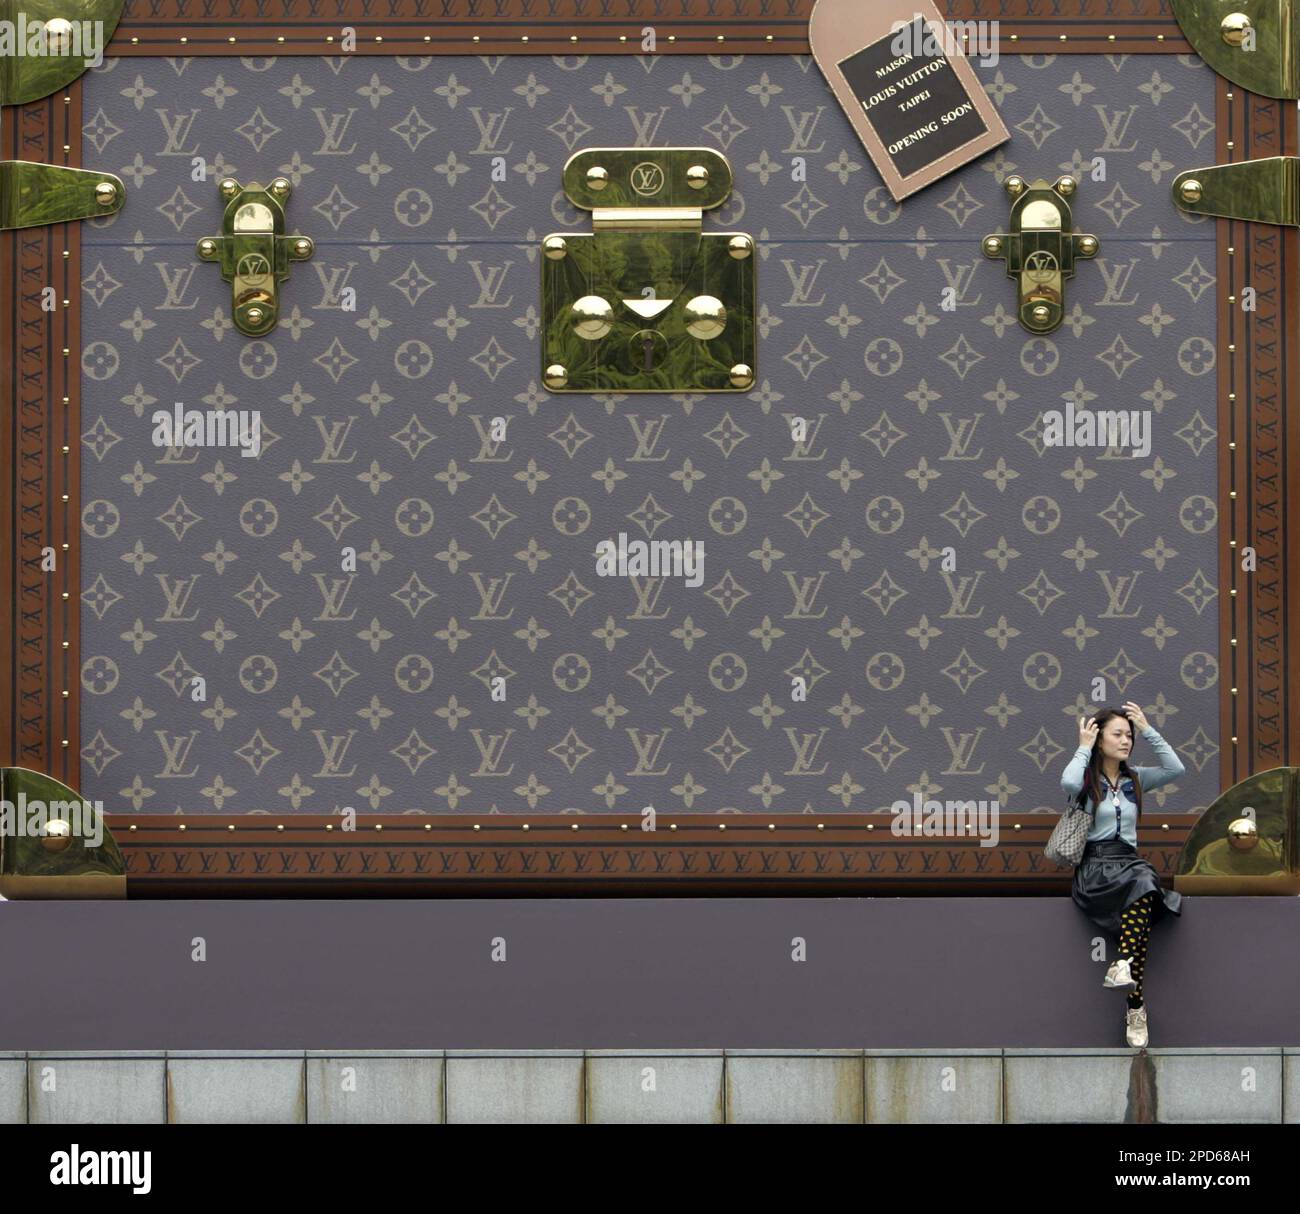 I Played the Louis Vuitton Video Game, But Who Is it For?